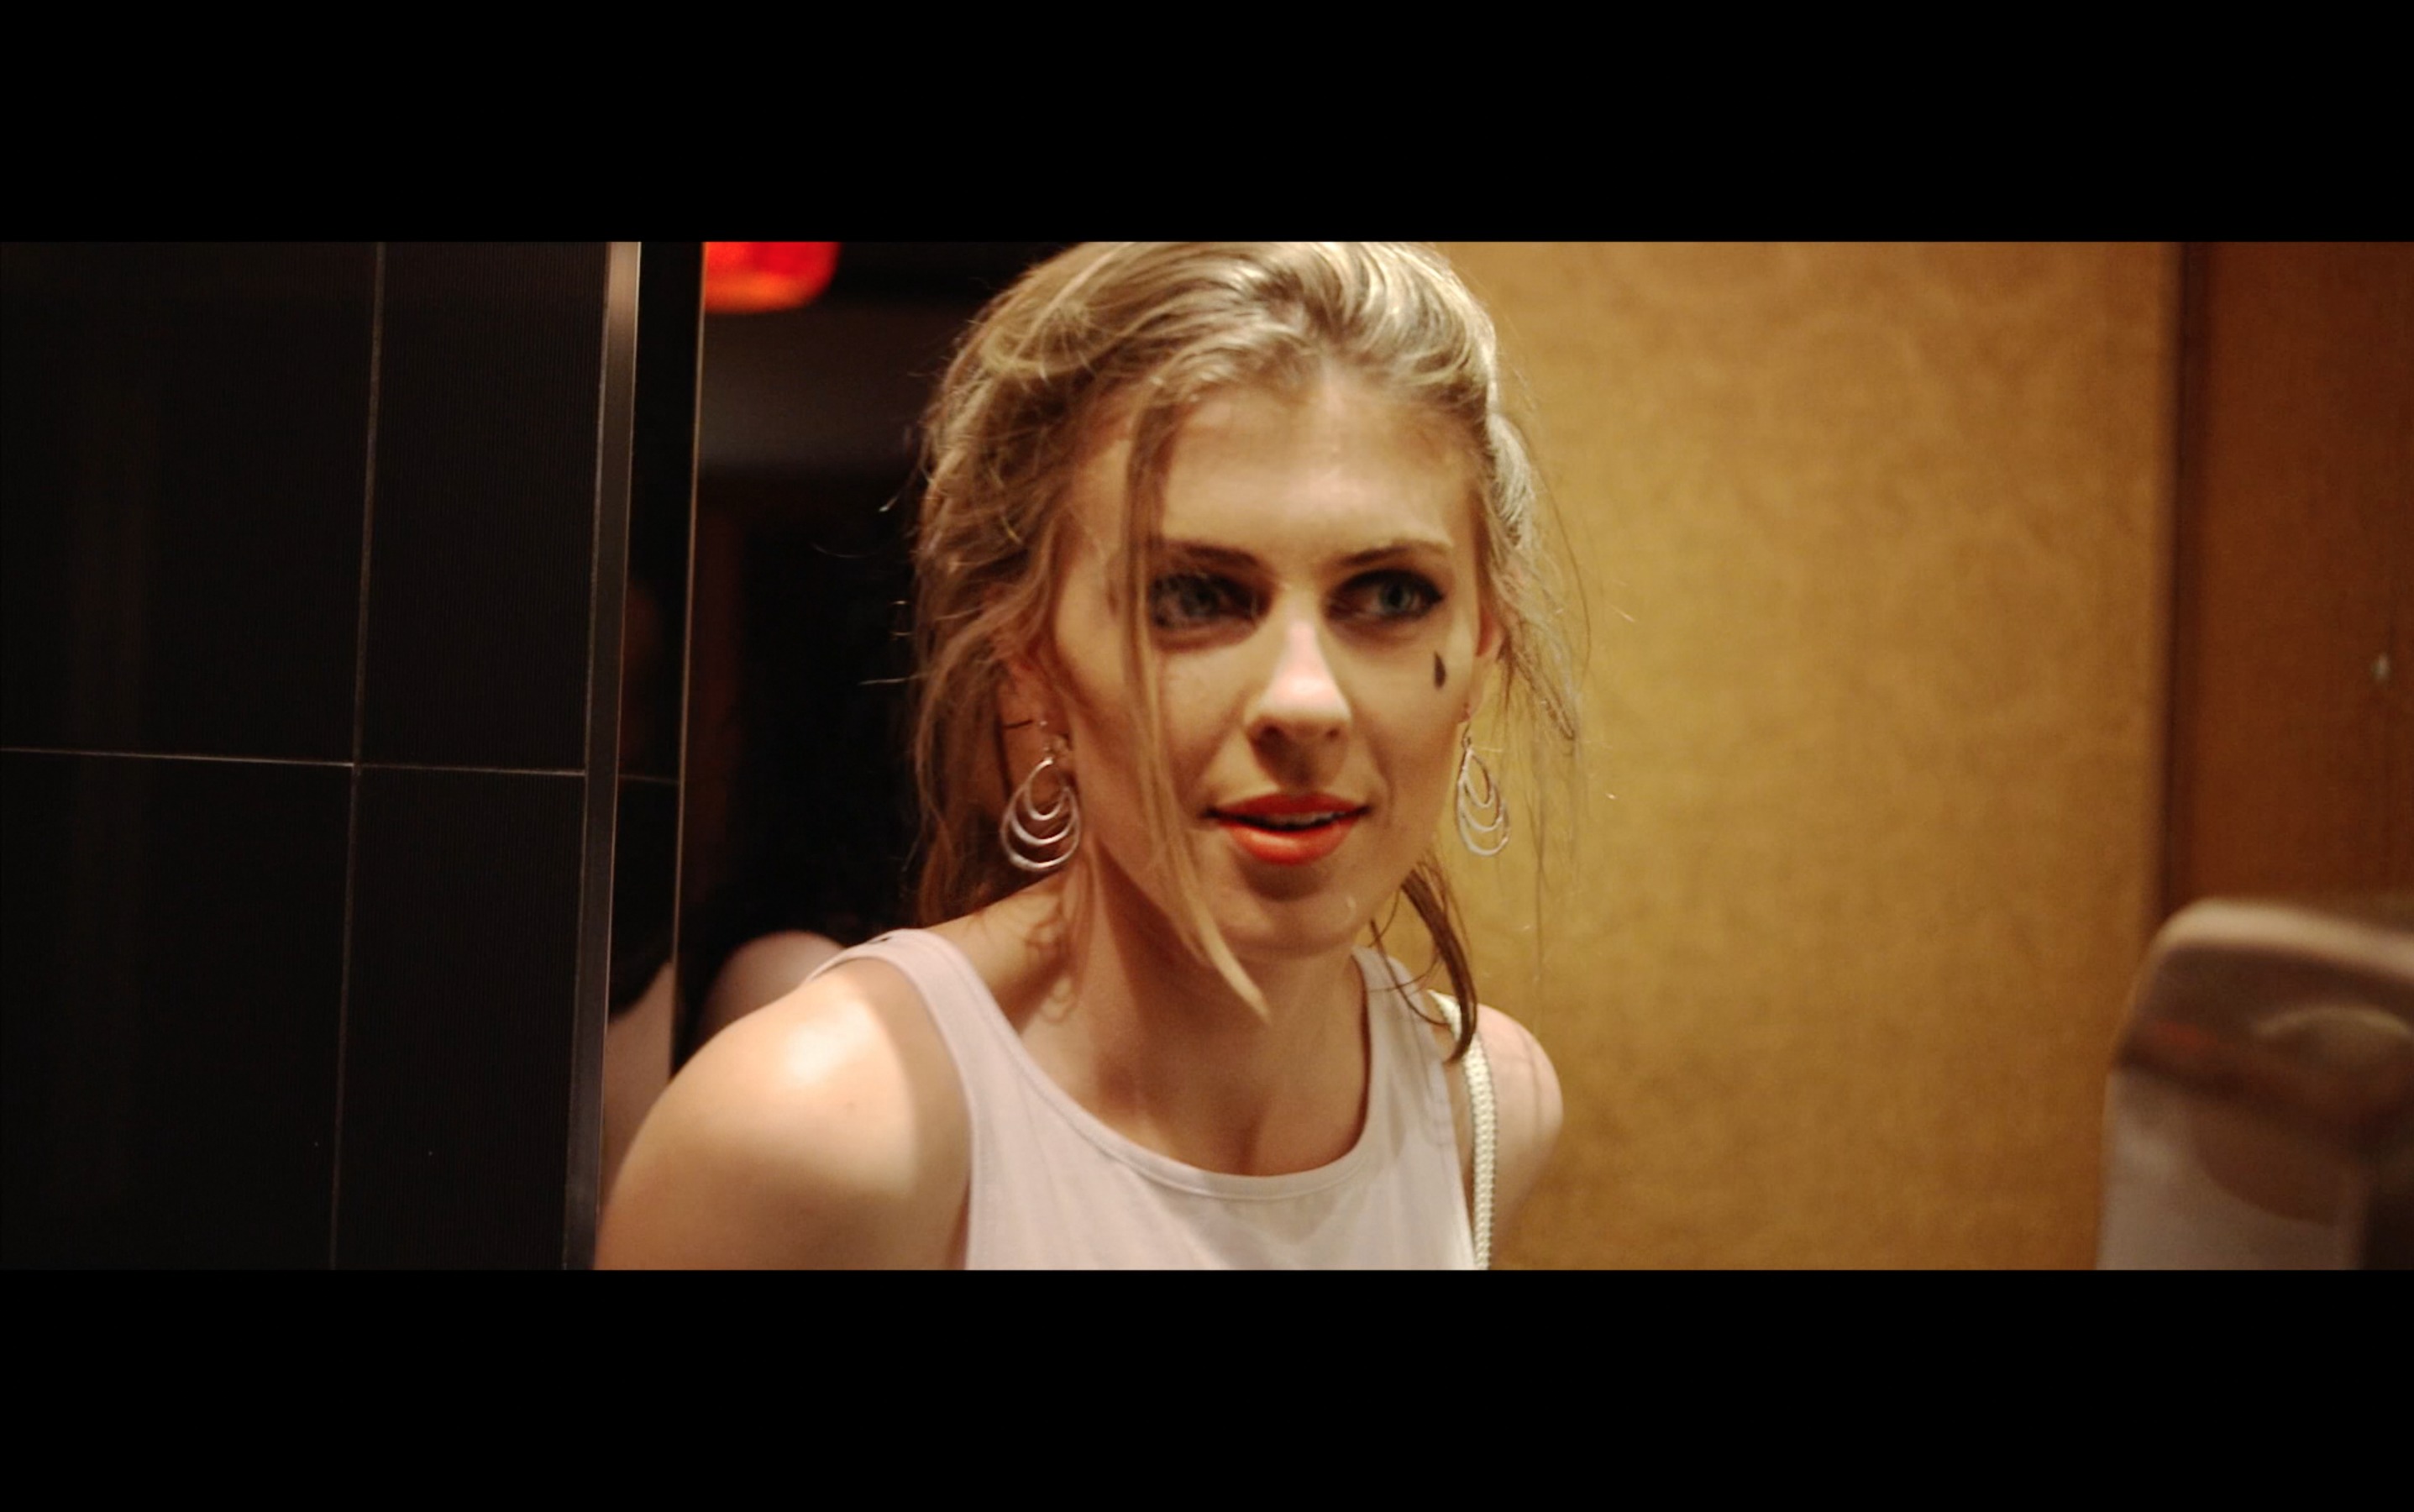 Lucy Lovegrove as Chantelle in 'My Love, Where Have You Been?'